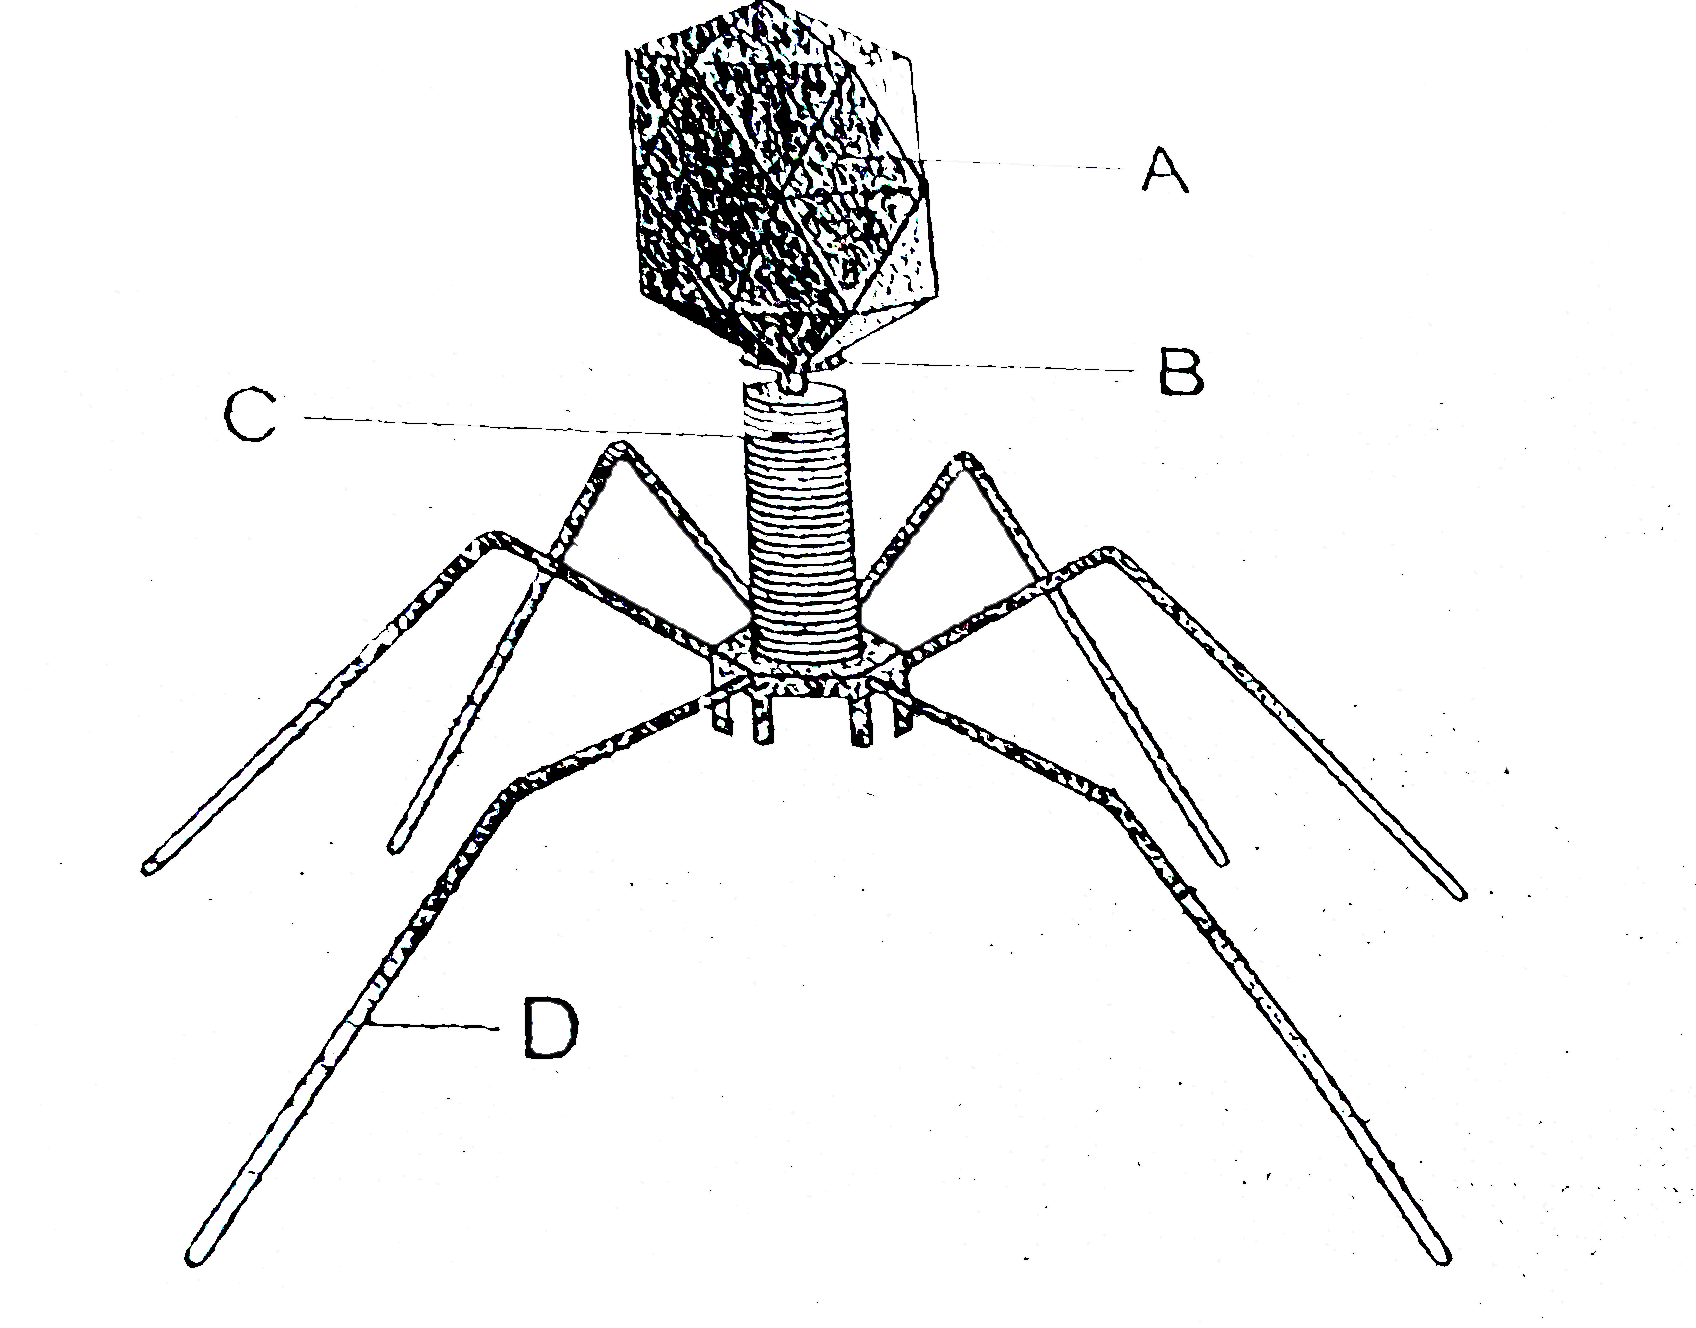 Identify A, B, C and D parts in this diagram of bacteriophage.